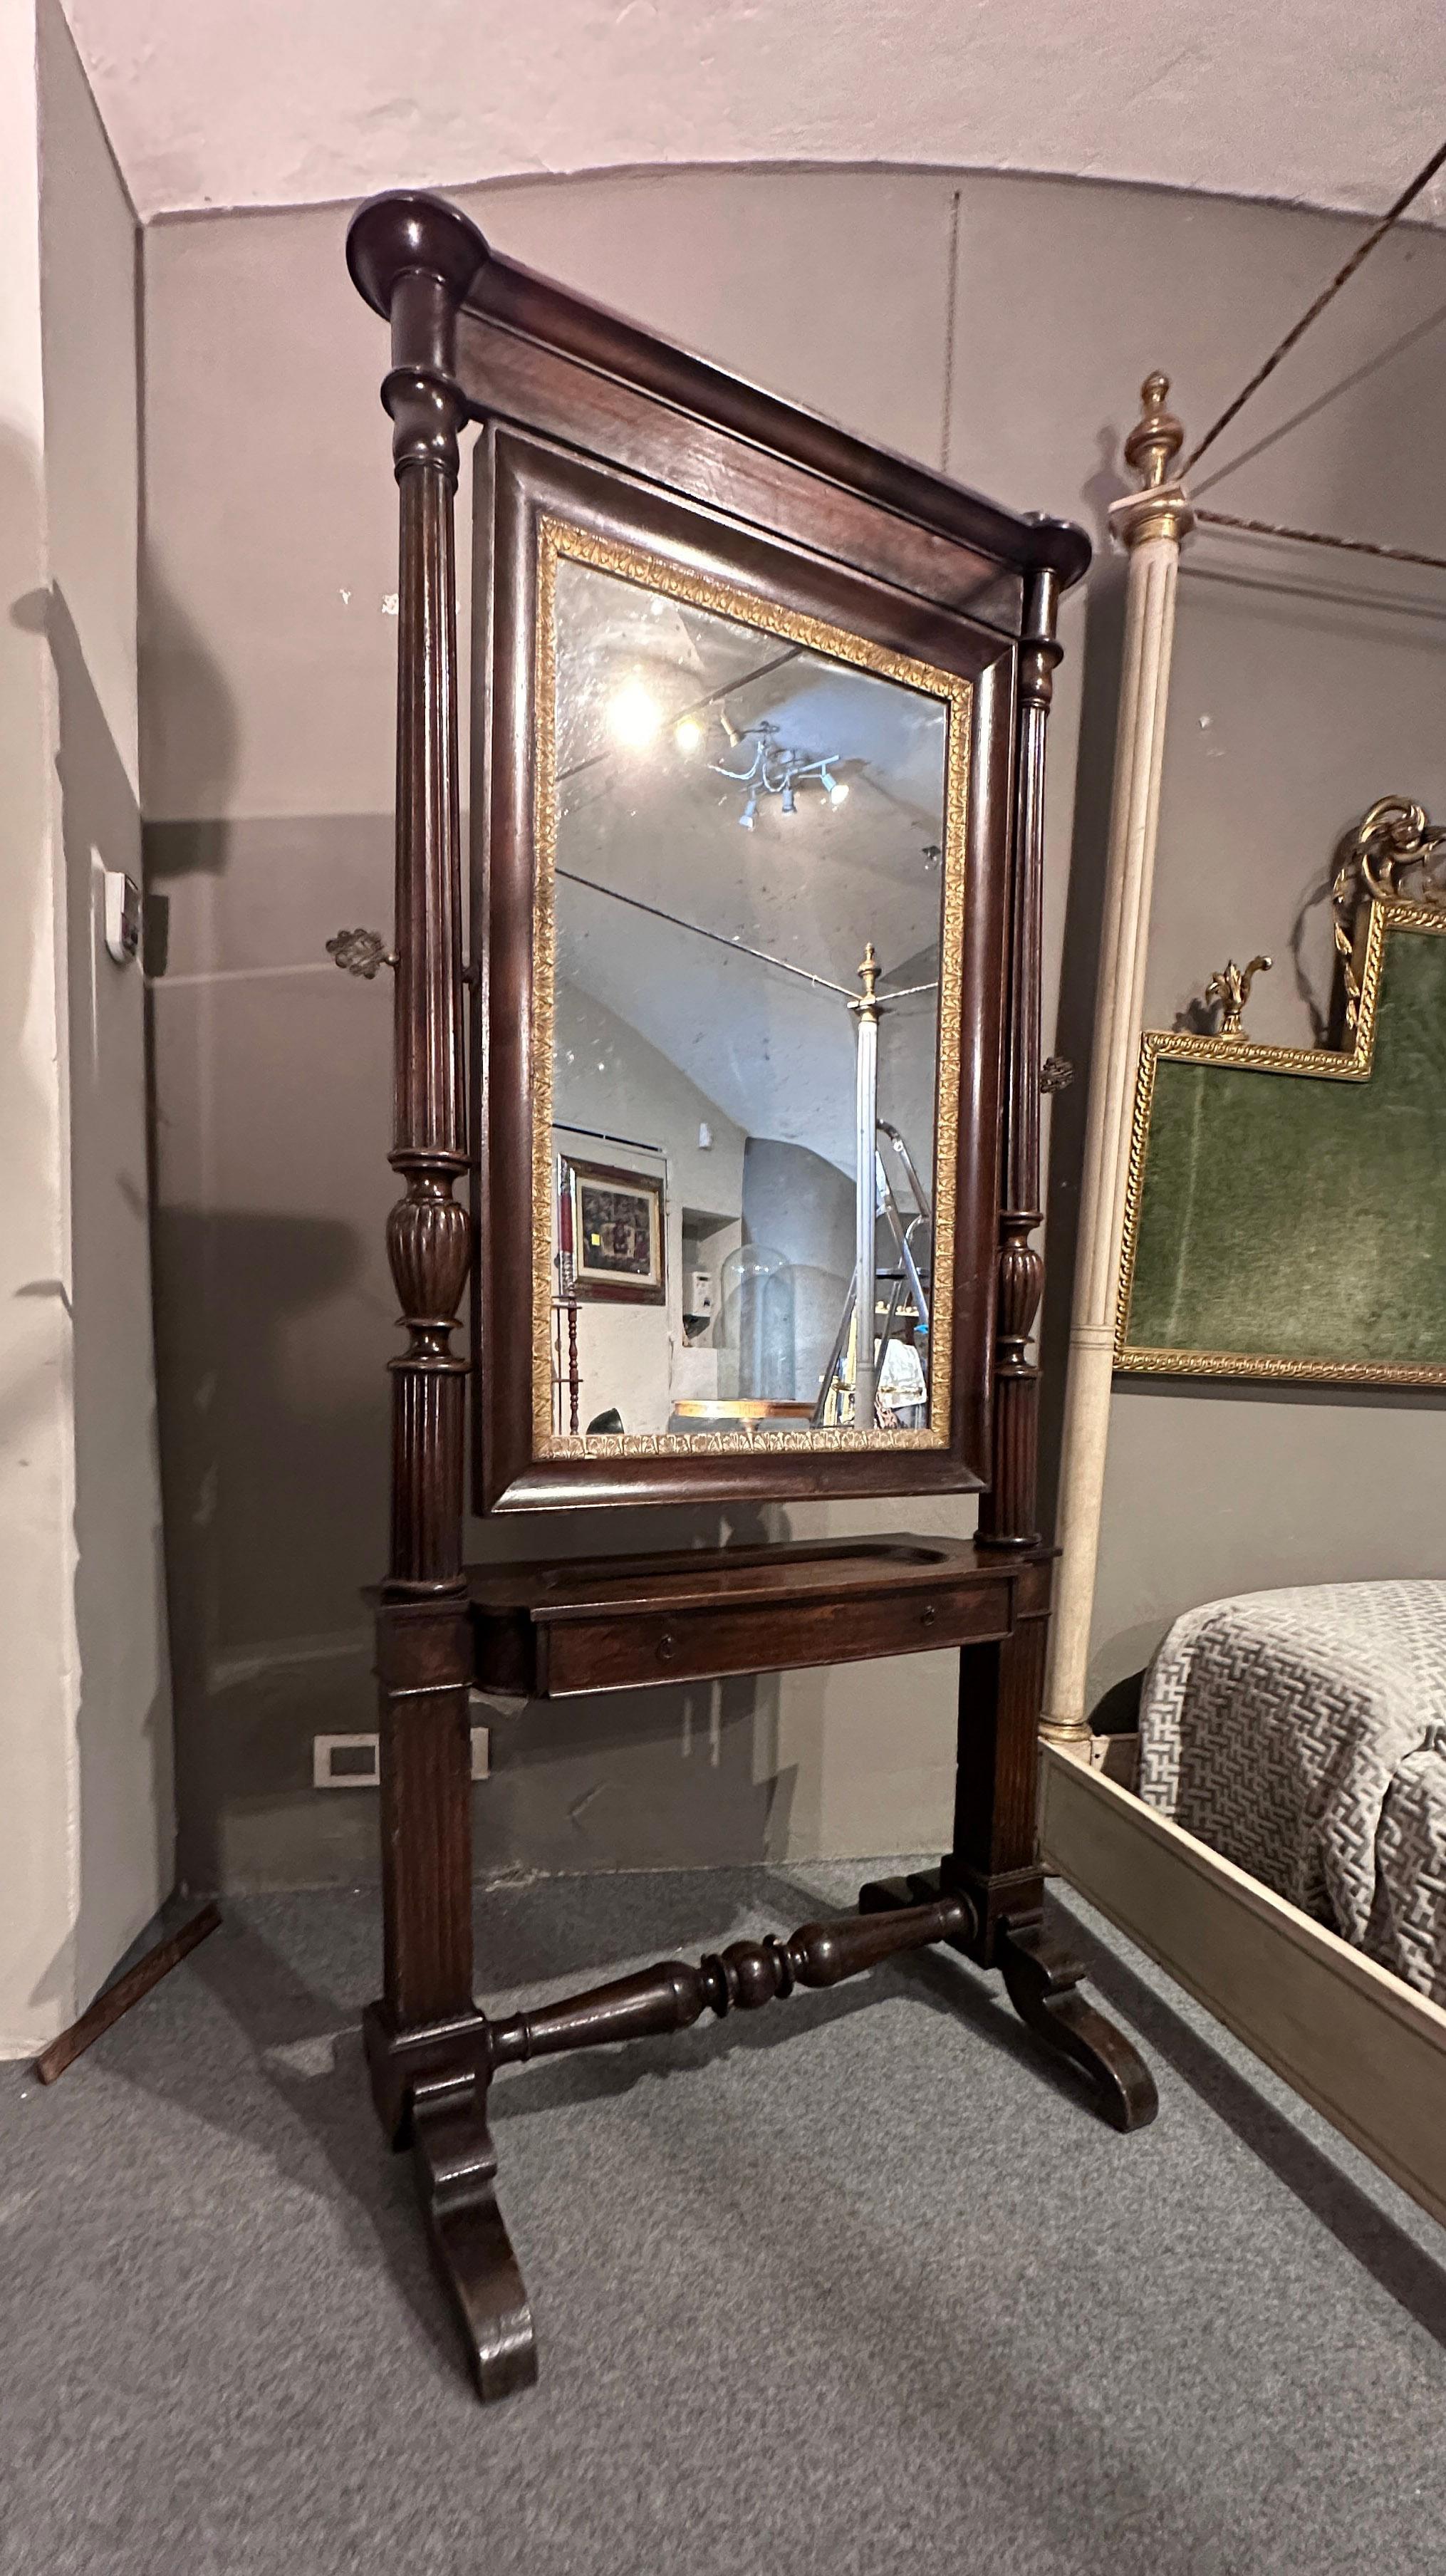 EARLY 19th CENTURY PSYCHE FLOOR MIRROR IN WALNUT For Sale 1